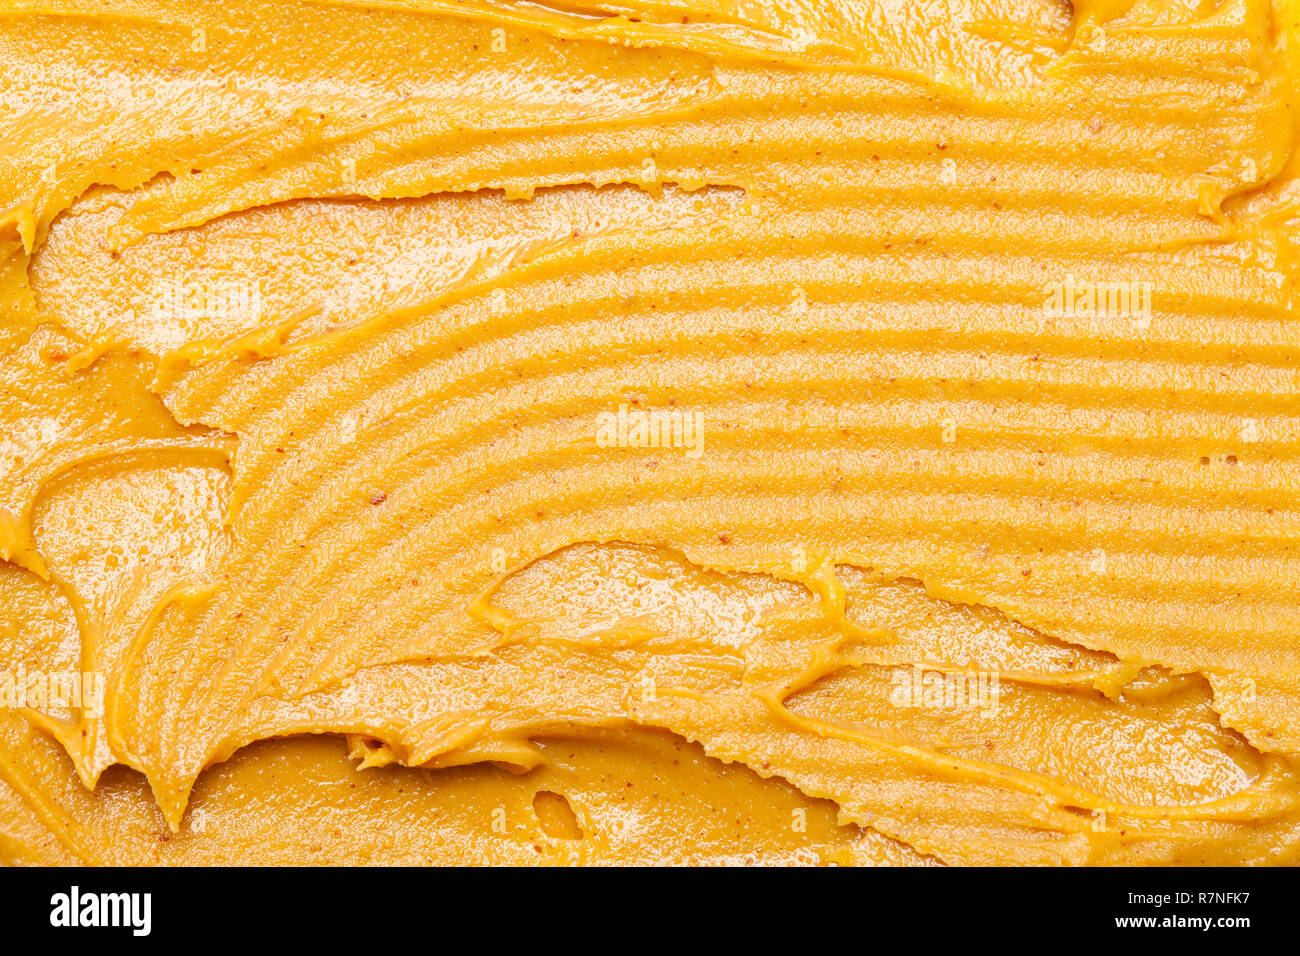 Smeared Peanut Butter Spread with Knife Grooves. Stock Photo